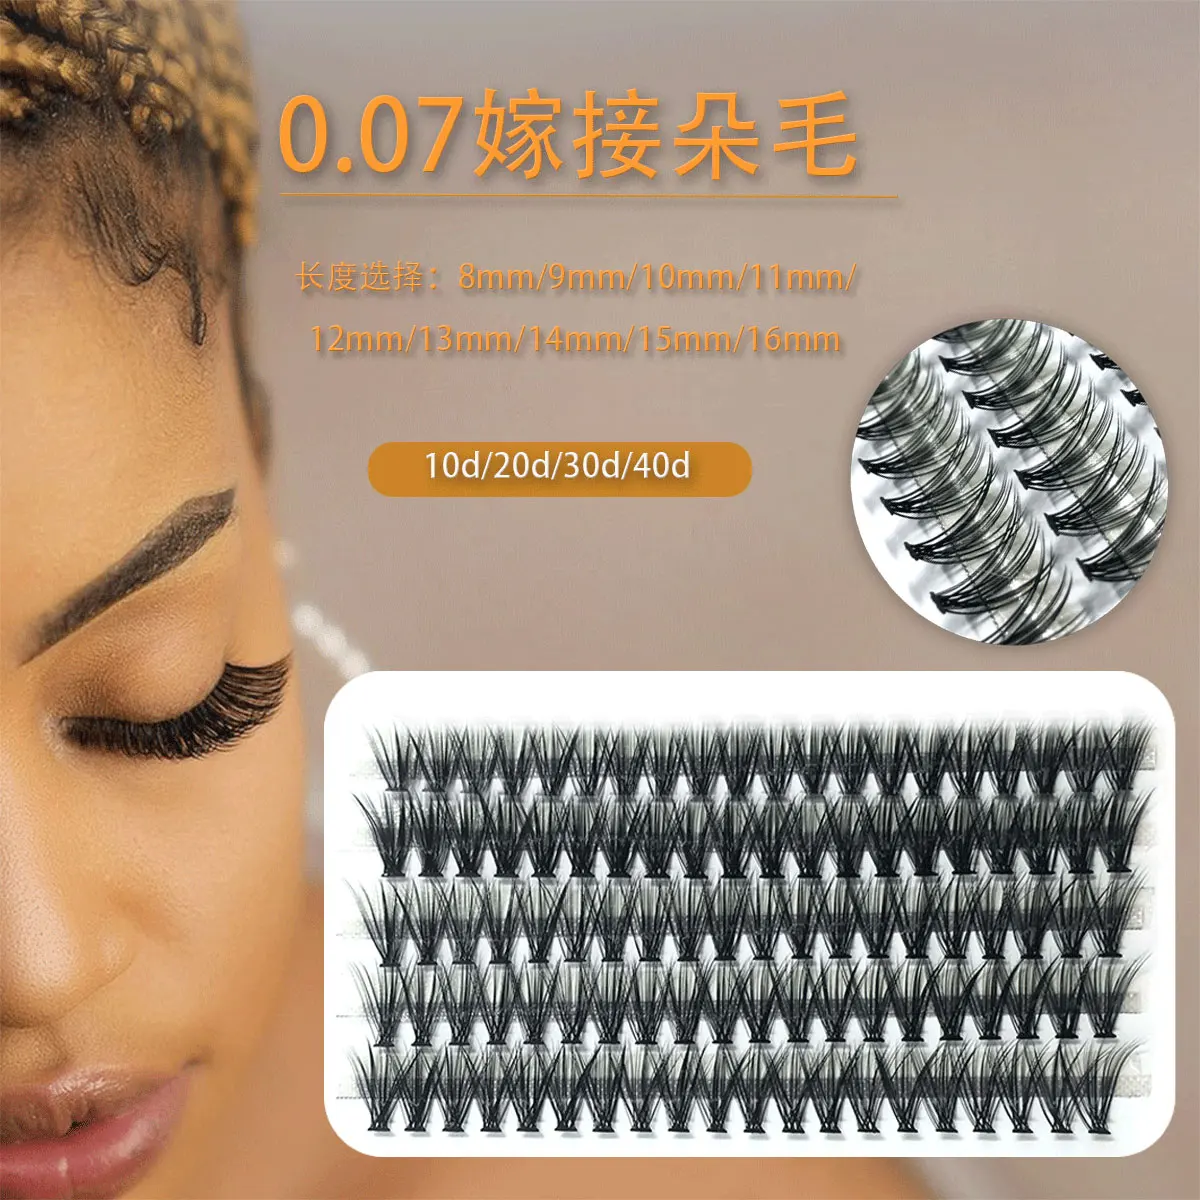 

5Rows Individual Lashes Natural Soft Thick Cluster False Lashes 10D/20D/30D/40D Mink Volume Eyelashes Eye Extension Makeup Tool